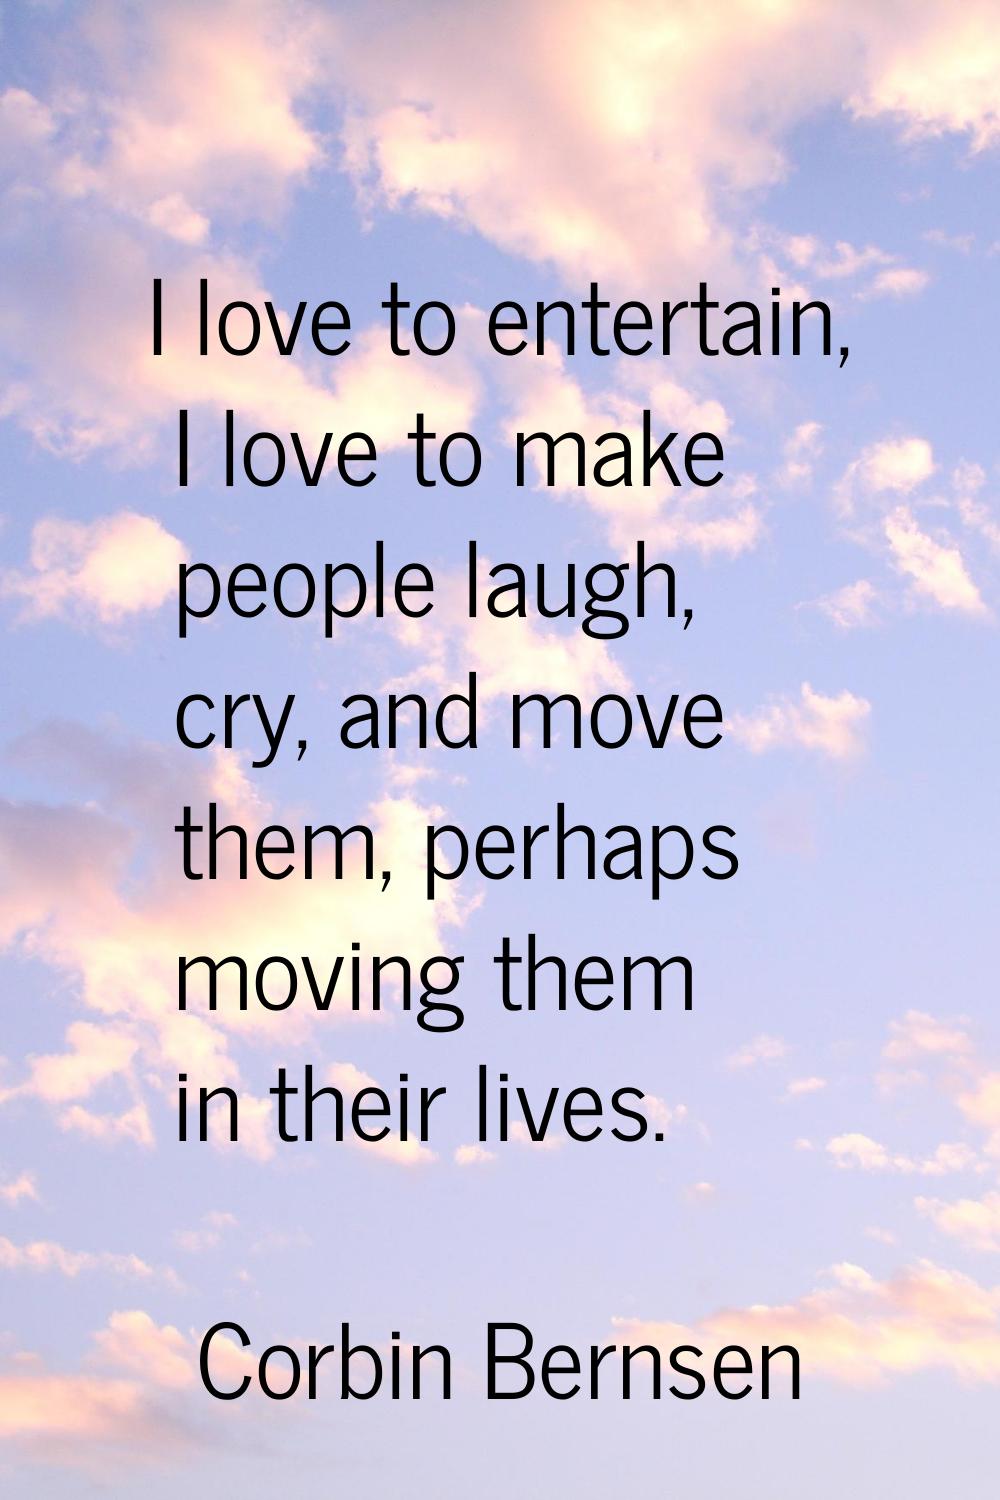 I love to entertain, I love to make people laugh, cry, and move them, perhaps moving them in their 